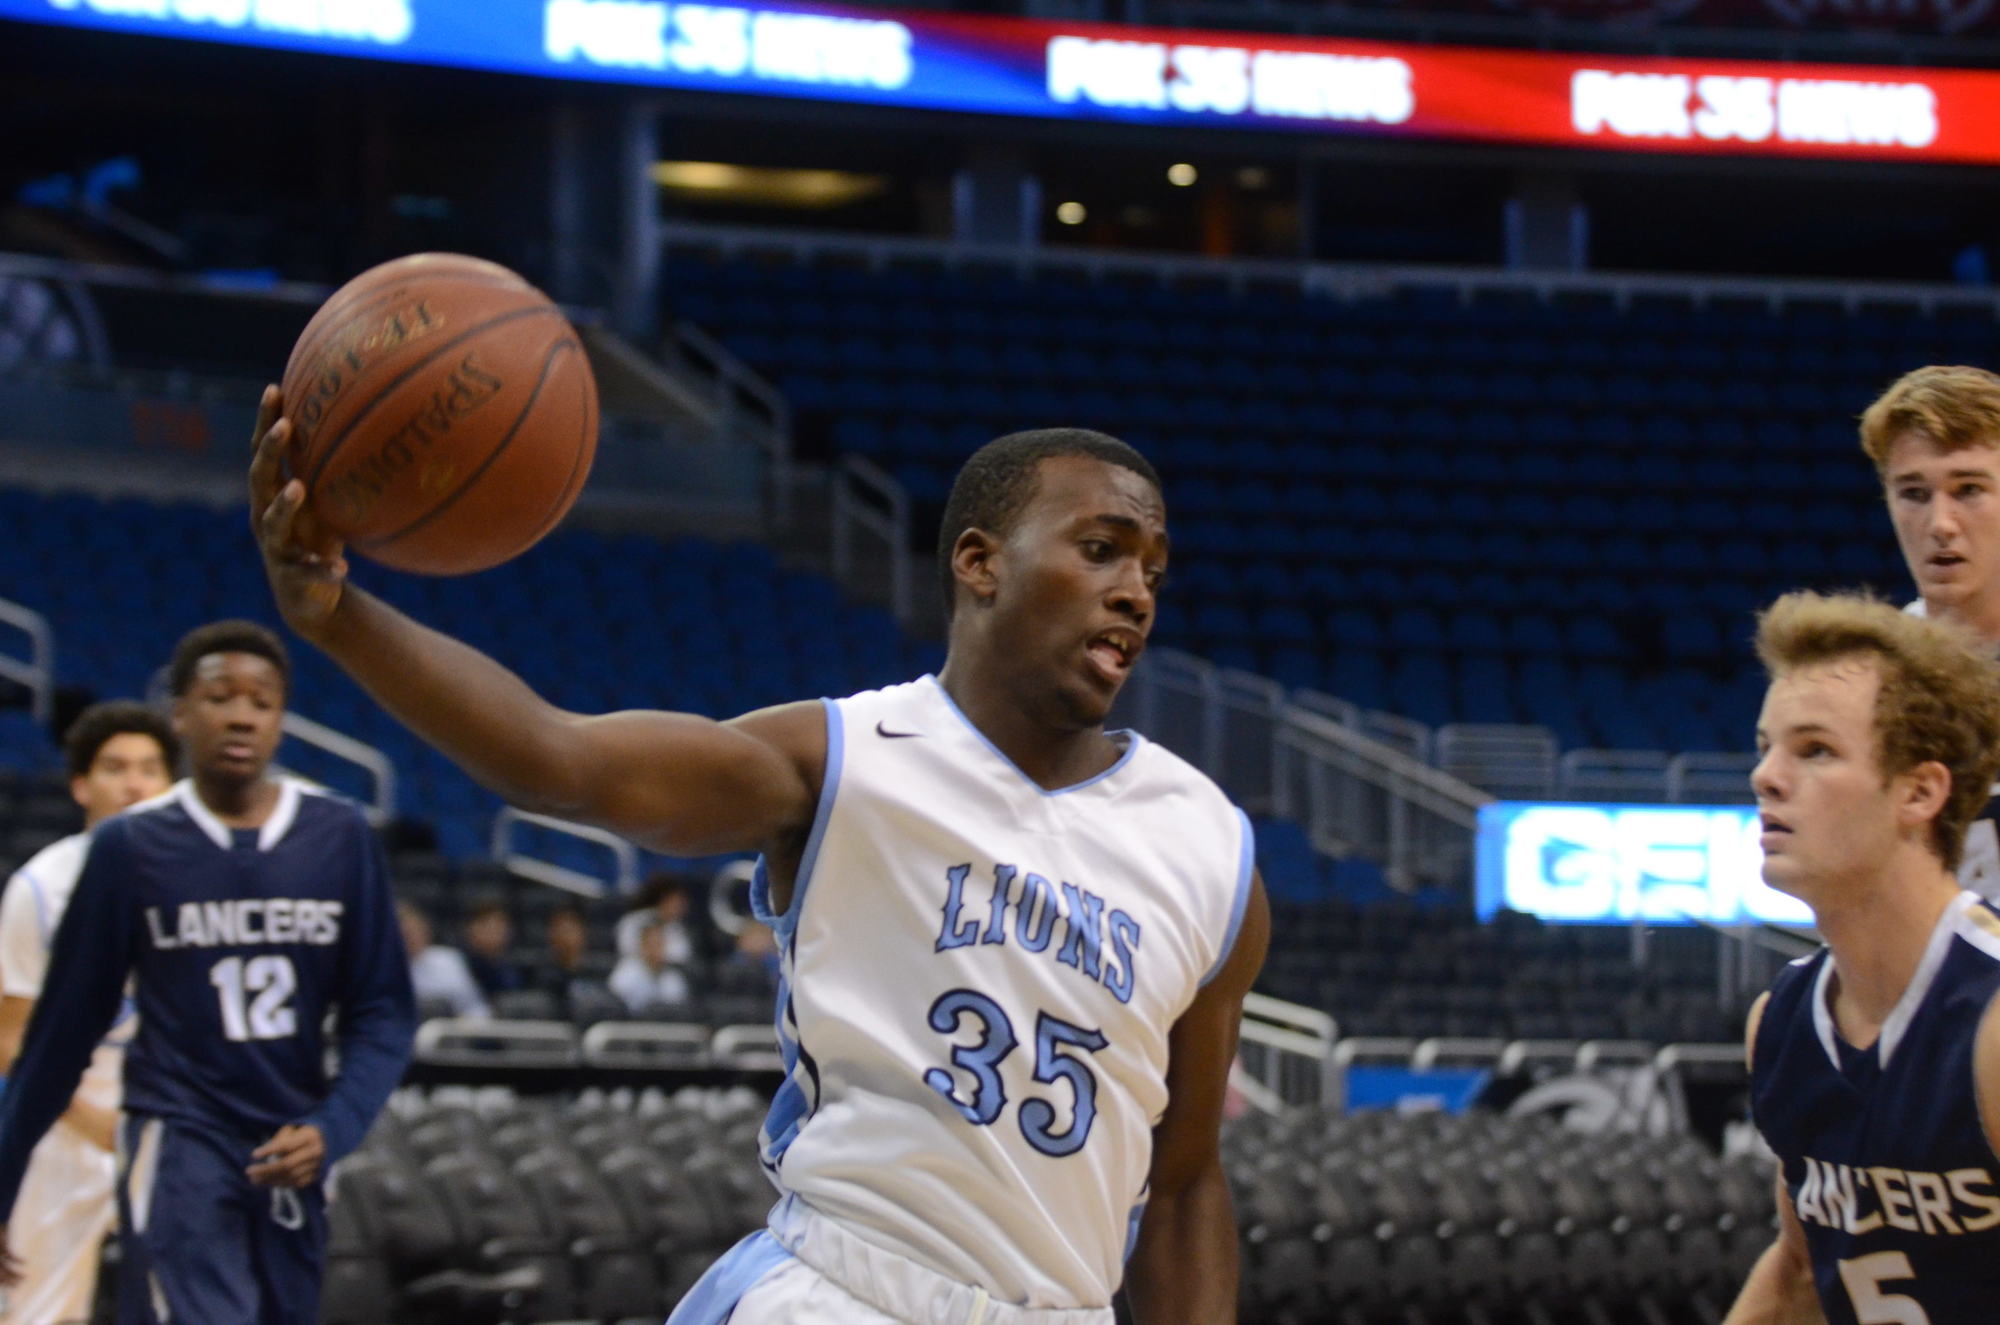 Jaquan Patterson and the Foundation Academy Lions are hopeful for an upset.